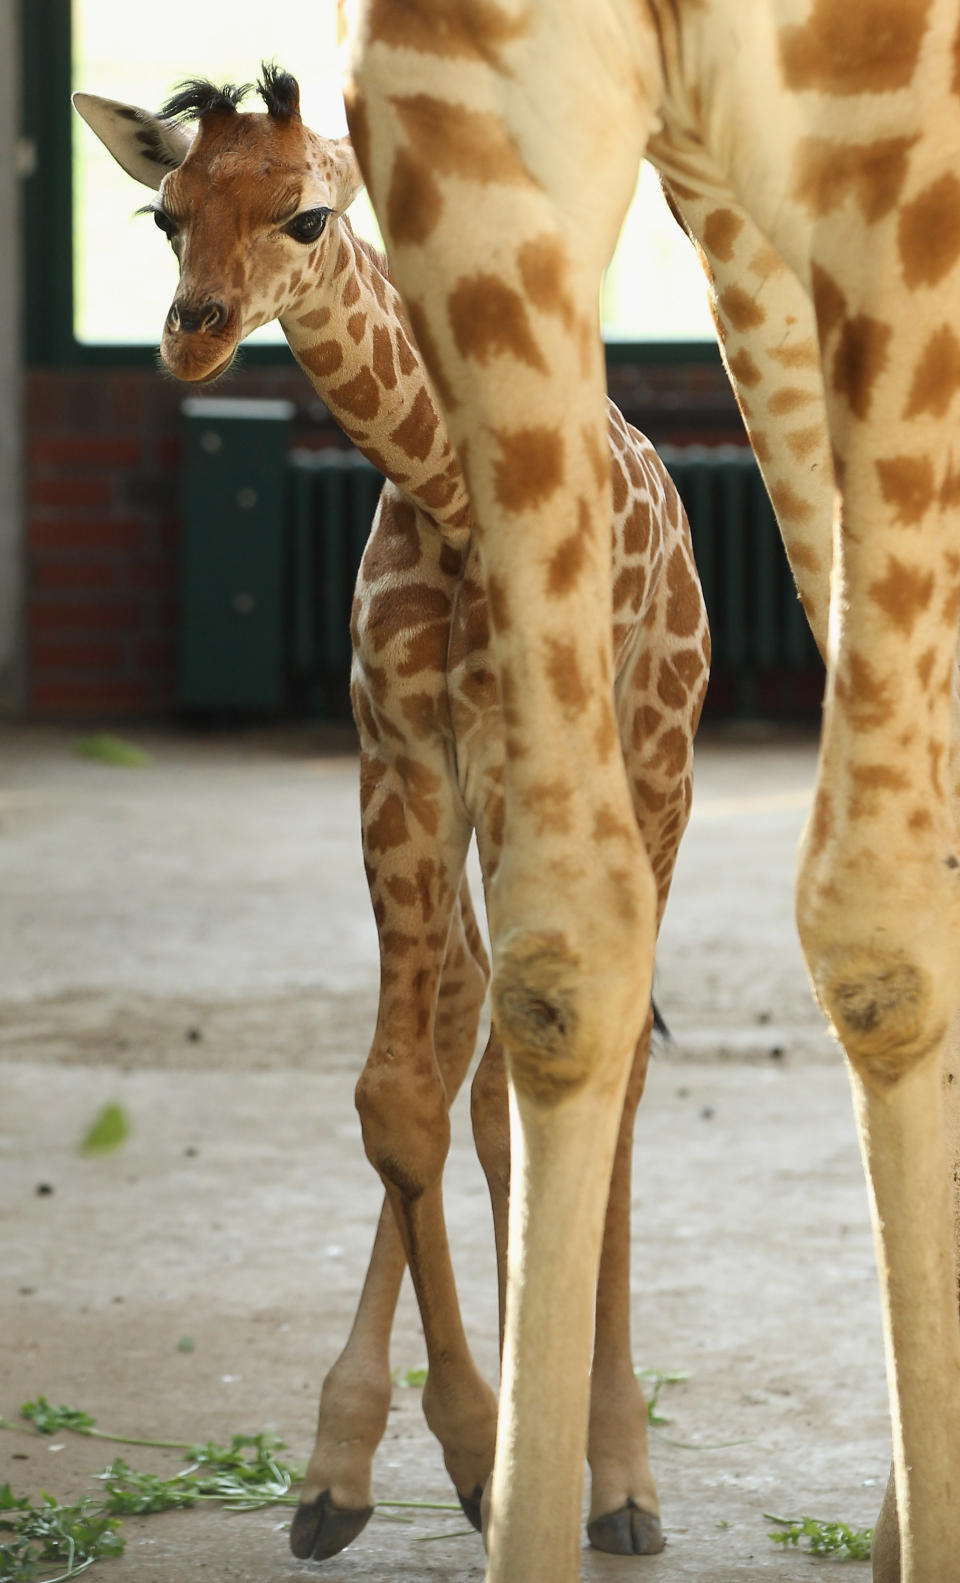 BERLIN, GERMANY - JUNE 29: Jule, a baby Rothschild giraffe, stands next to an adult giraffe in her enclosure at Tierpark Berlin zoo on June 29, 2012 in Berlin, Germany. Jule was born at the zoo on June 10. (Photo by Sean Gallup/Getty Images)